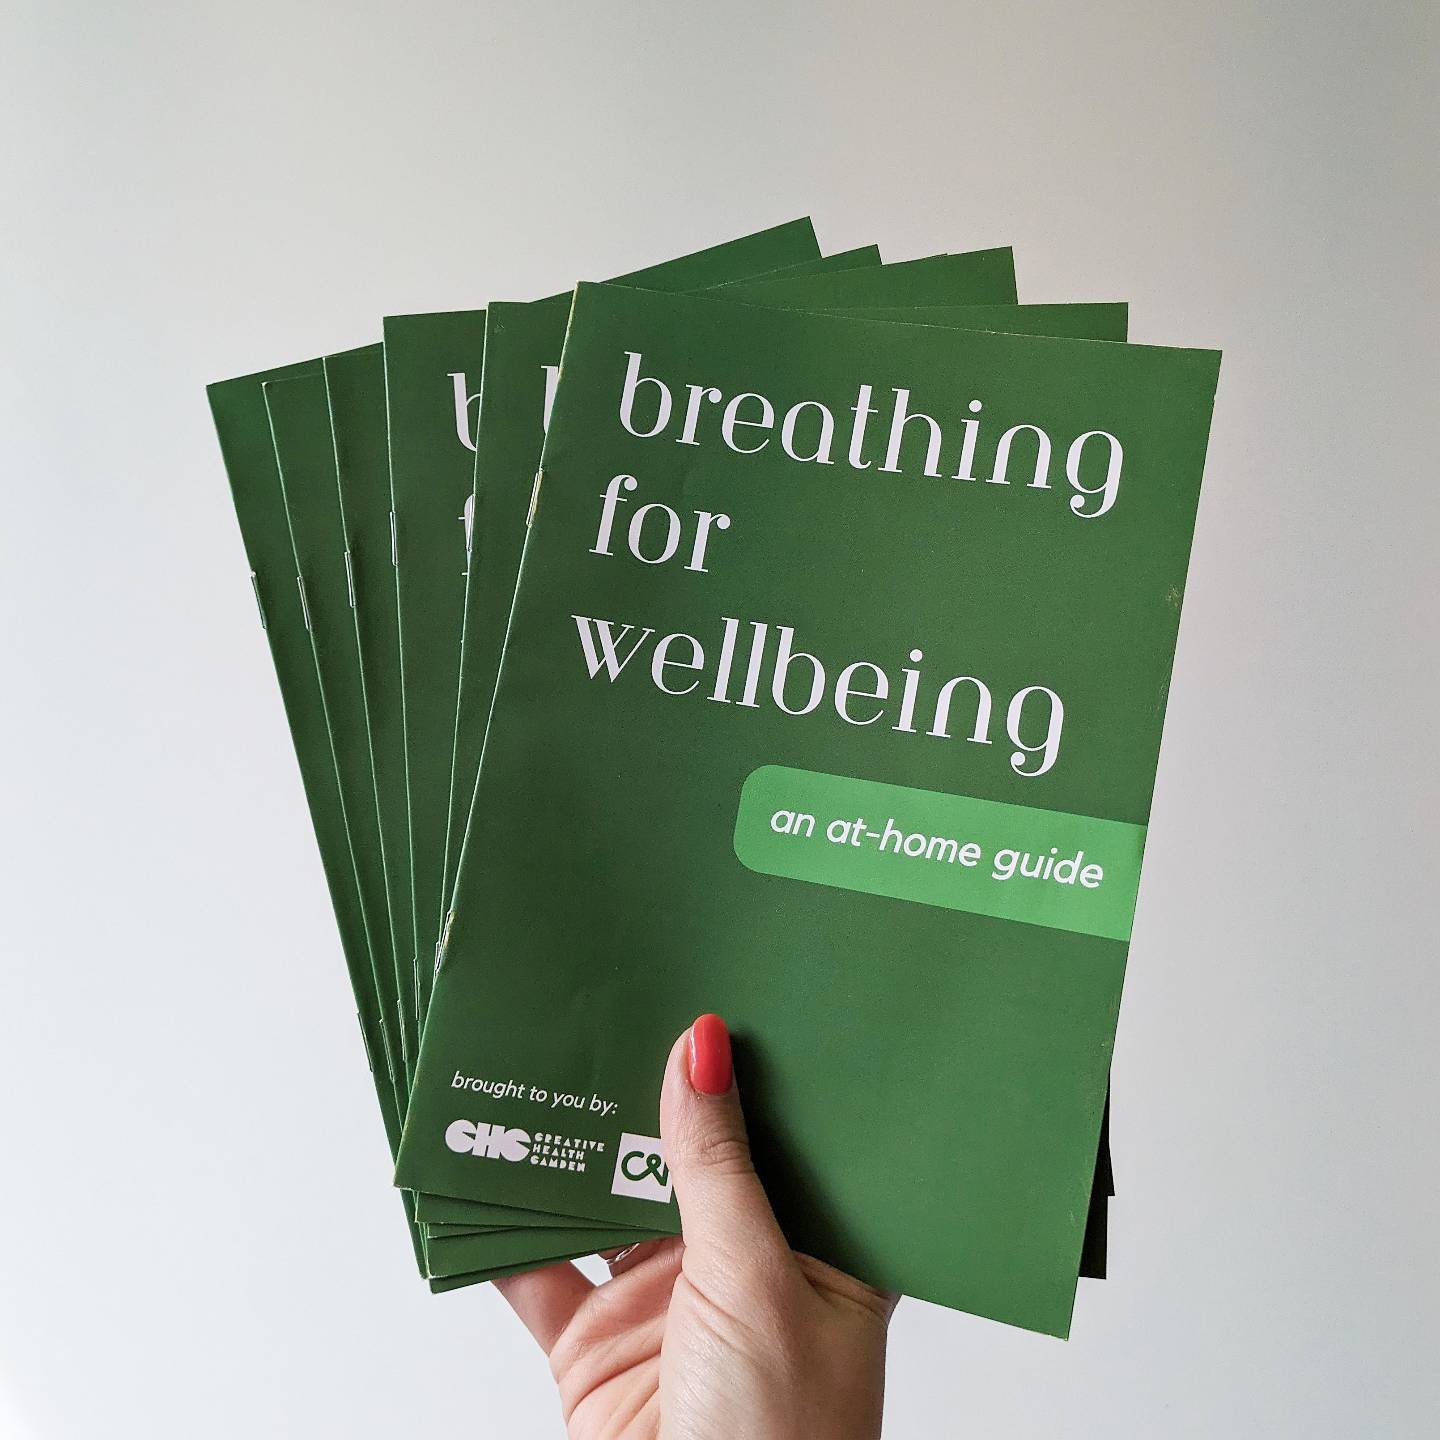 Our brand new Breathing for Wellbeing leaflets have arrived! This at-home guide was developed for you to be able to take part from the comfort of your living room. 

Free to download via the link in our bio, and there are some physical booklets at th